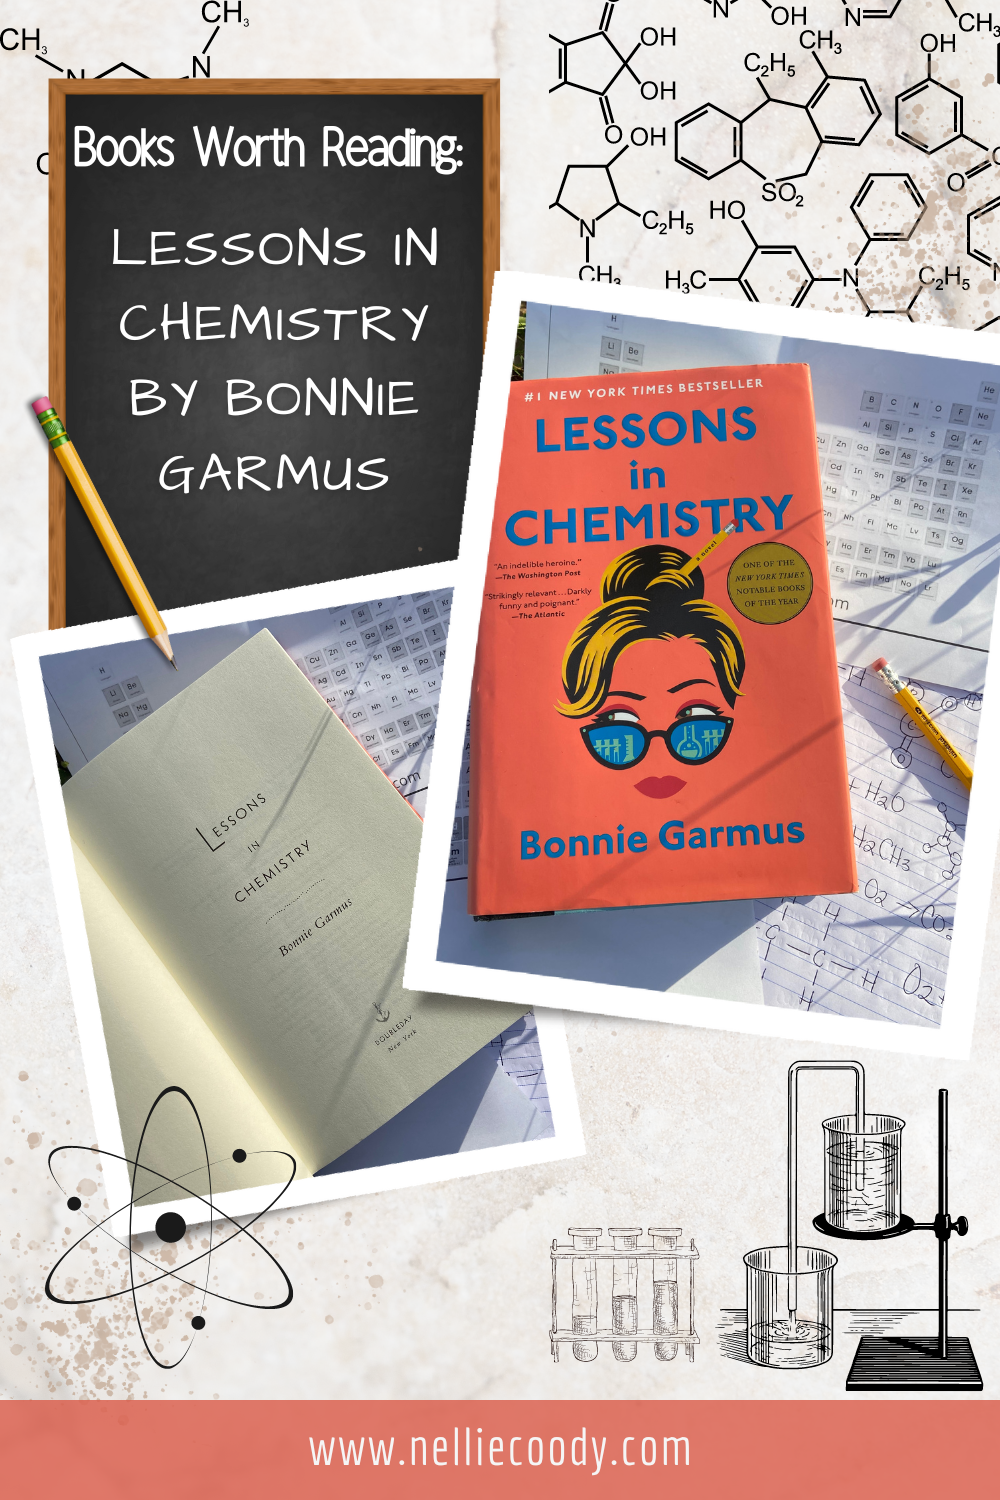 Books Worth Reading: Lessons in Chemistry by Bonnie Garmus